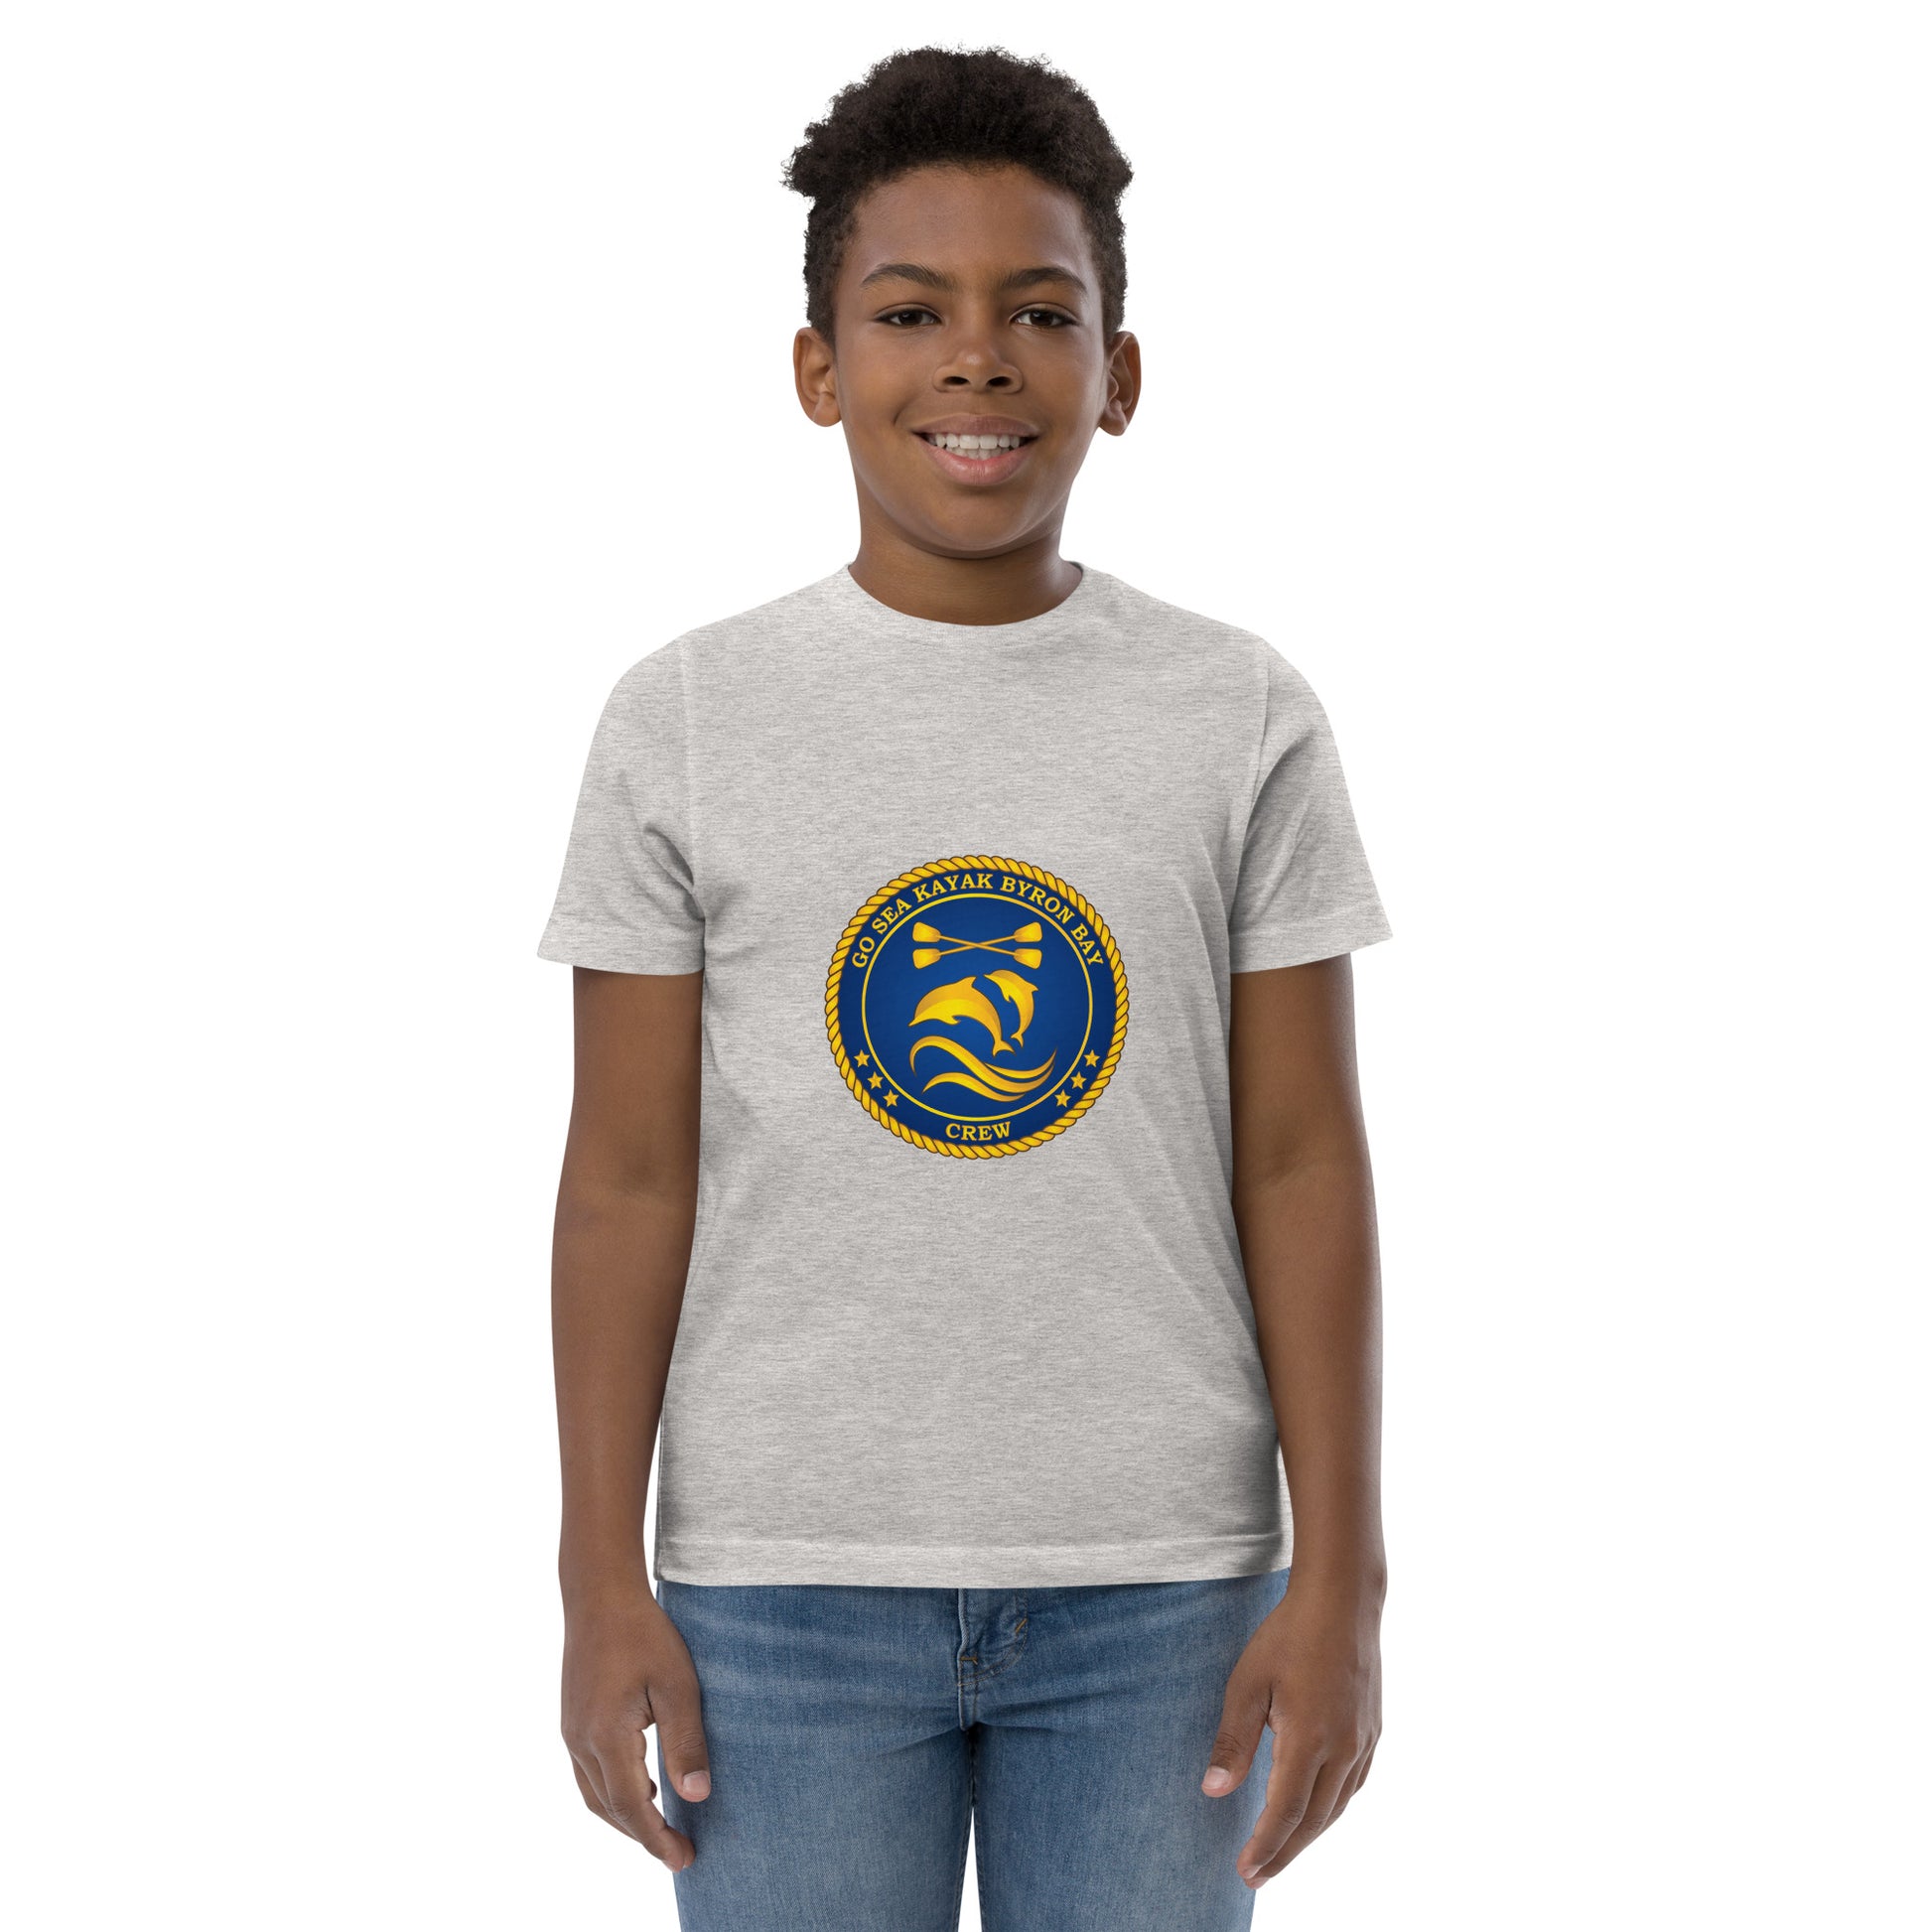  Kids T-Shirt - Natural / Heather colour - Front view, being warn on boy standing with his arms by his side - Go Sea Kayak Byron Bay Crew (issue 2018-2019) logo on front - Genuine Byron Bay Merchandise | Produced by Go Sea Kayak Byron Bay 